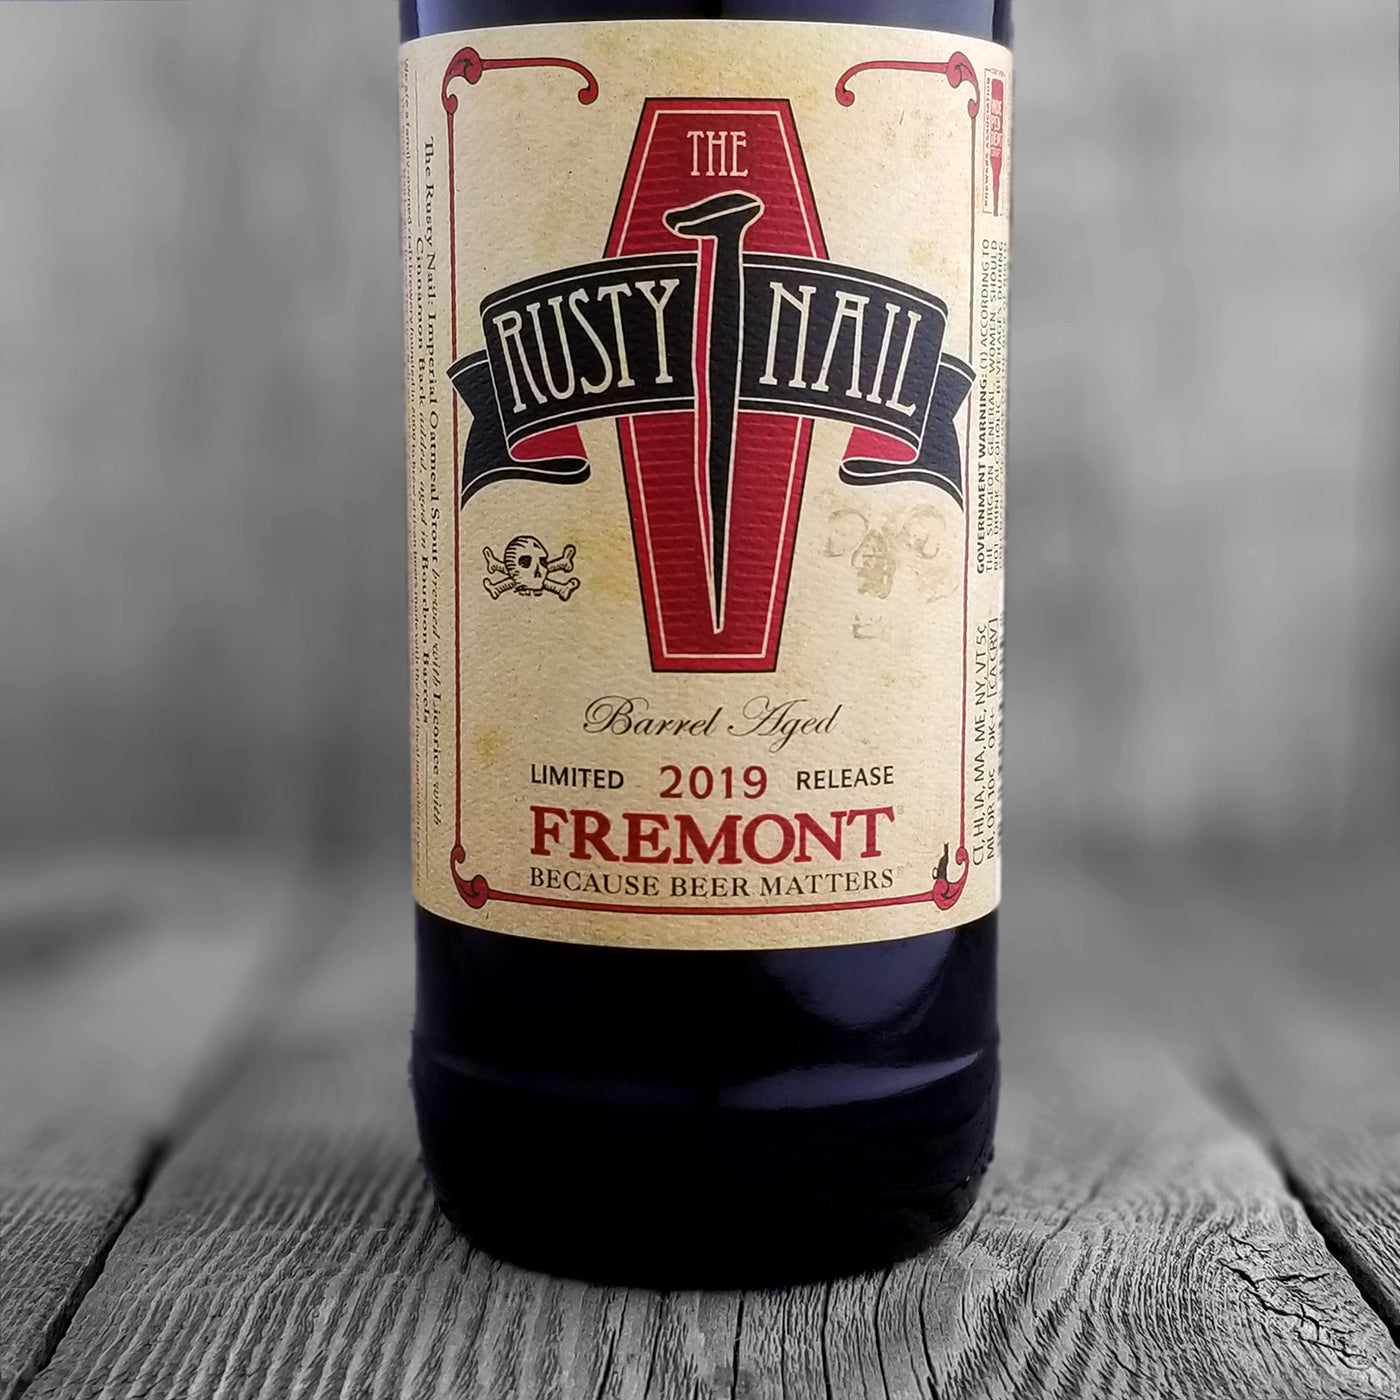 Fremont The Rusty Nail 2019 - Limit 1